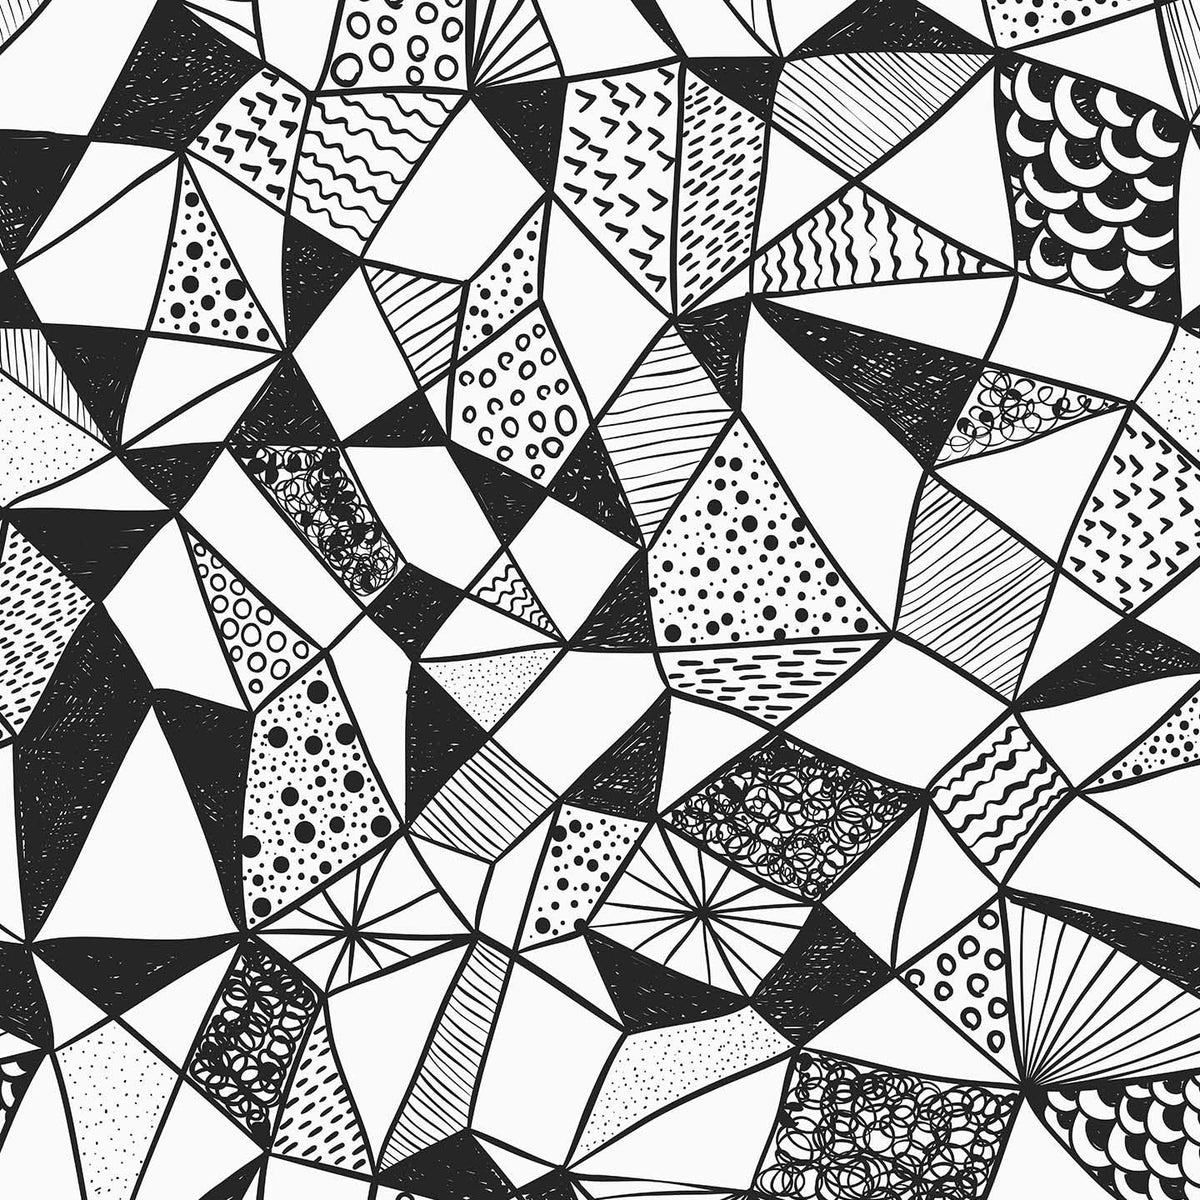 Geometric Shapes Wallpaper For Walls Contemporary Black And White Mural